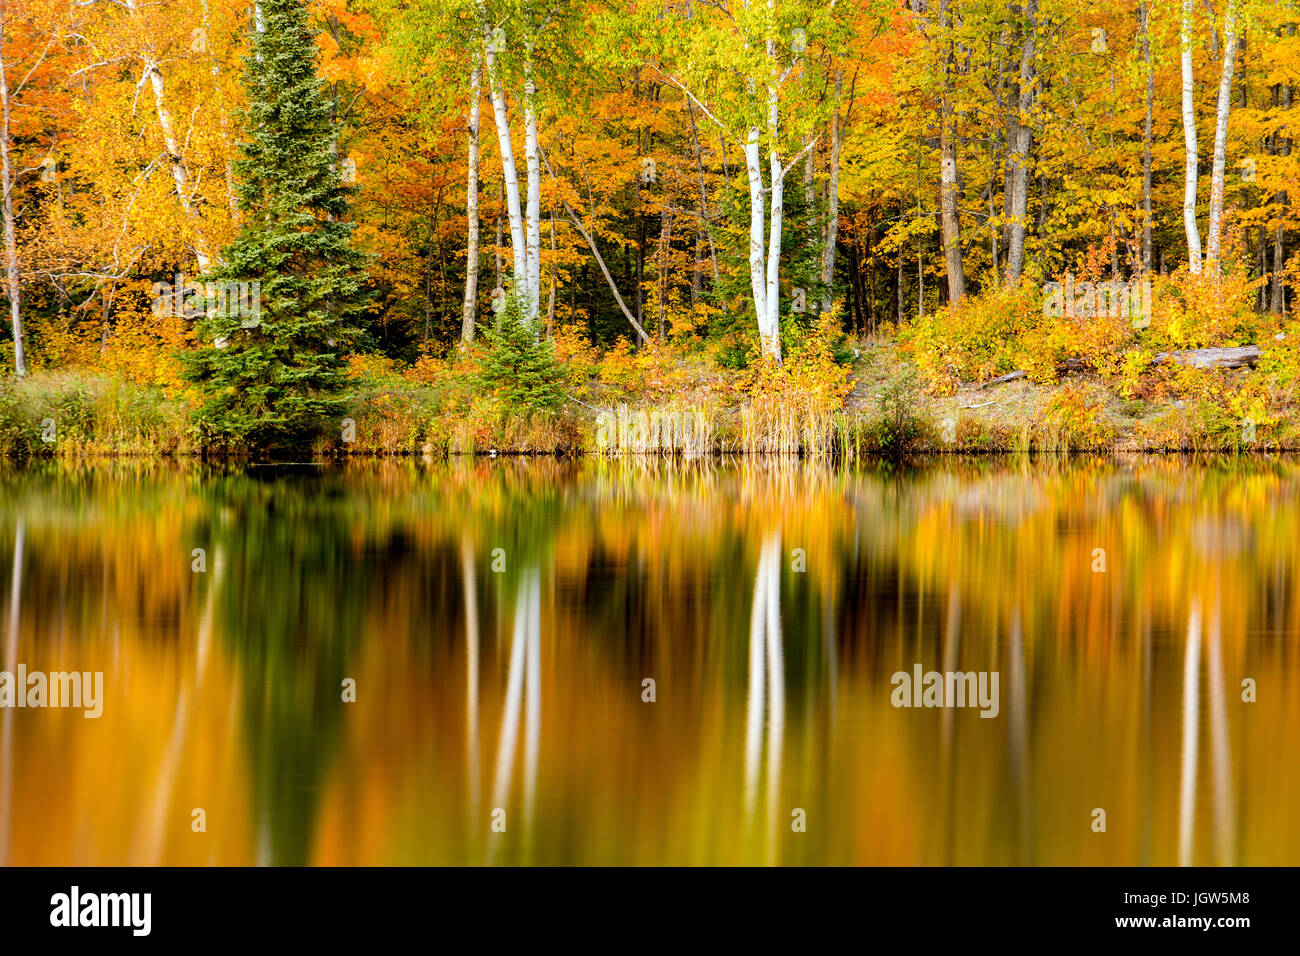 Birch trees with autumn colors reflect in the mirror like surface of a quiet lake in the Upper Peninsula of Michigan. Lake Plumbago offers many views  Stock Photo